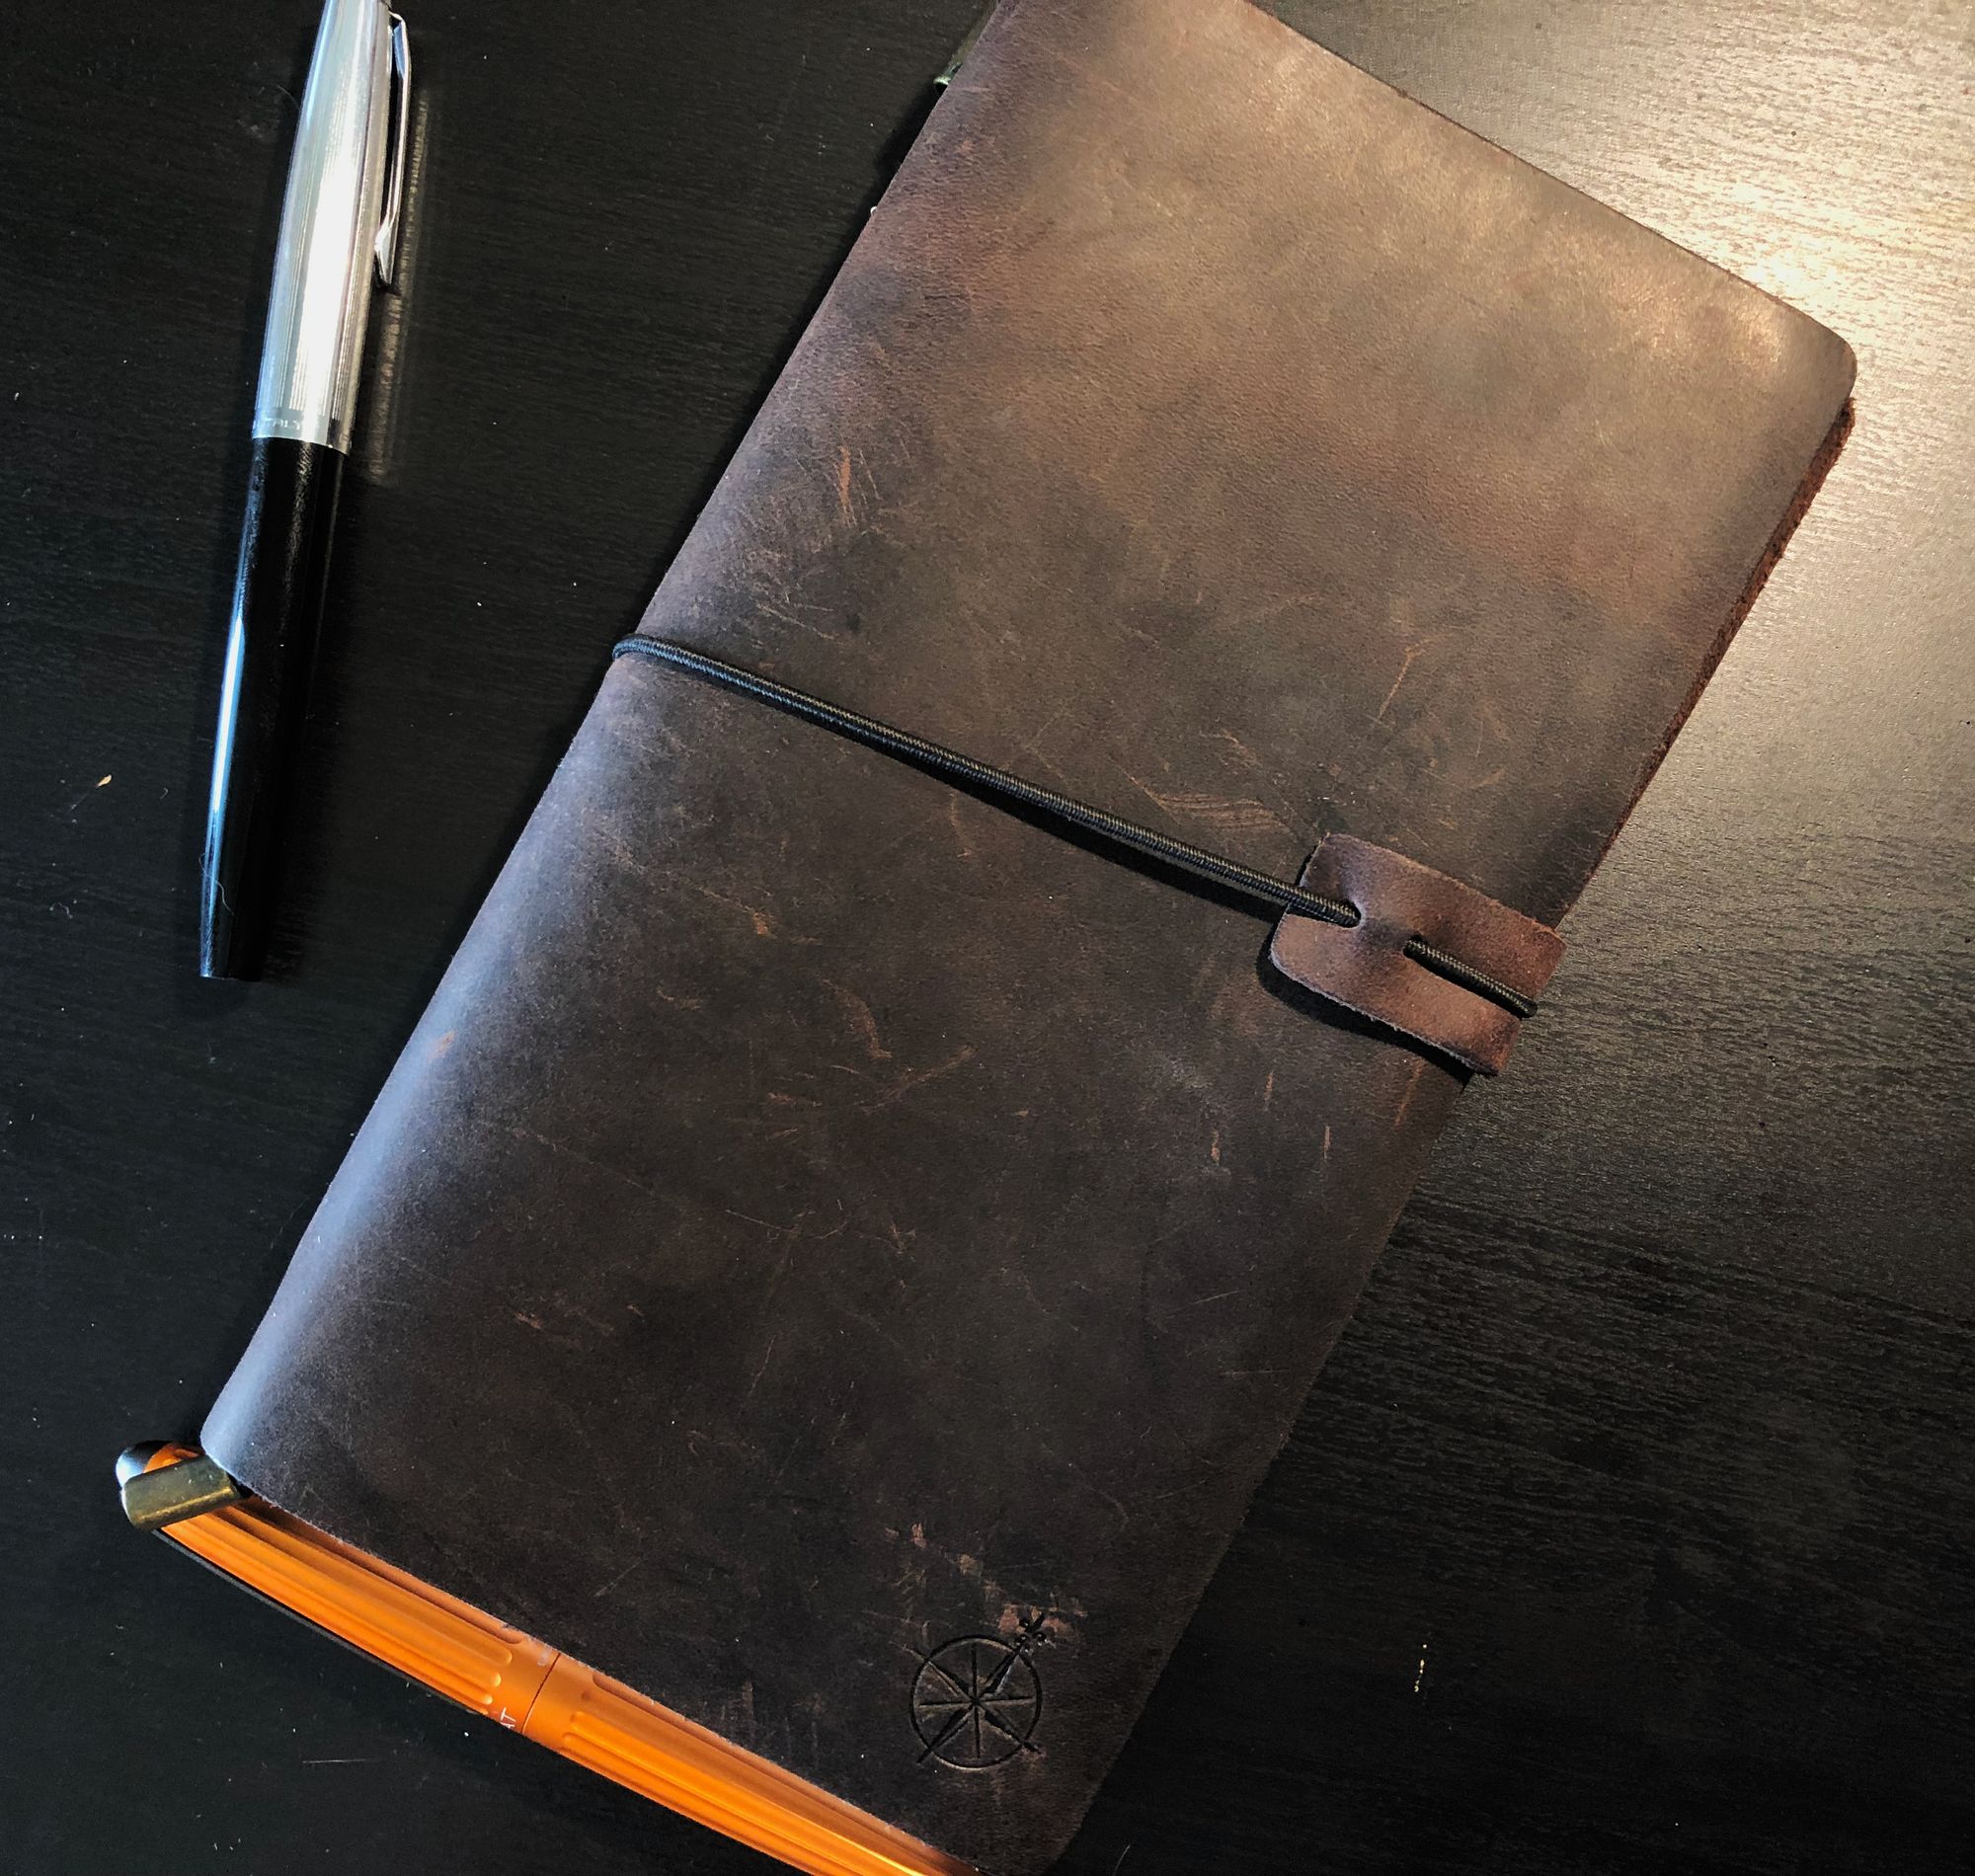 How Do You Use YourTraveler's* Notebook?